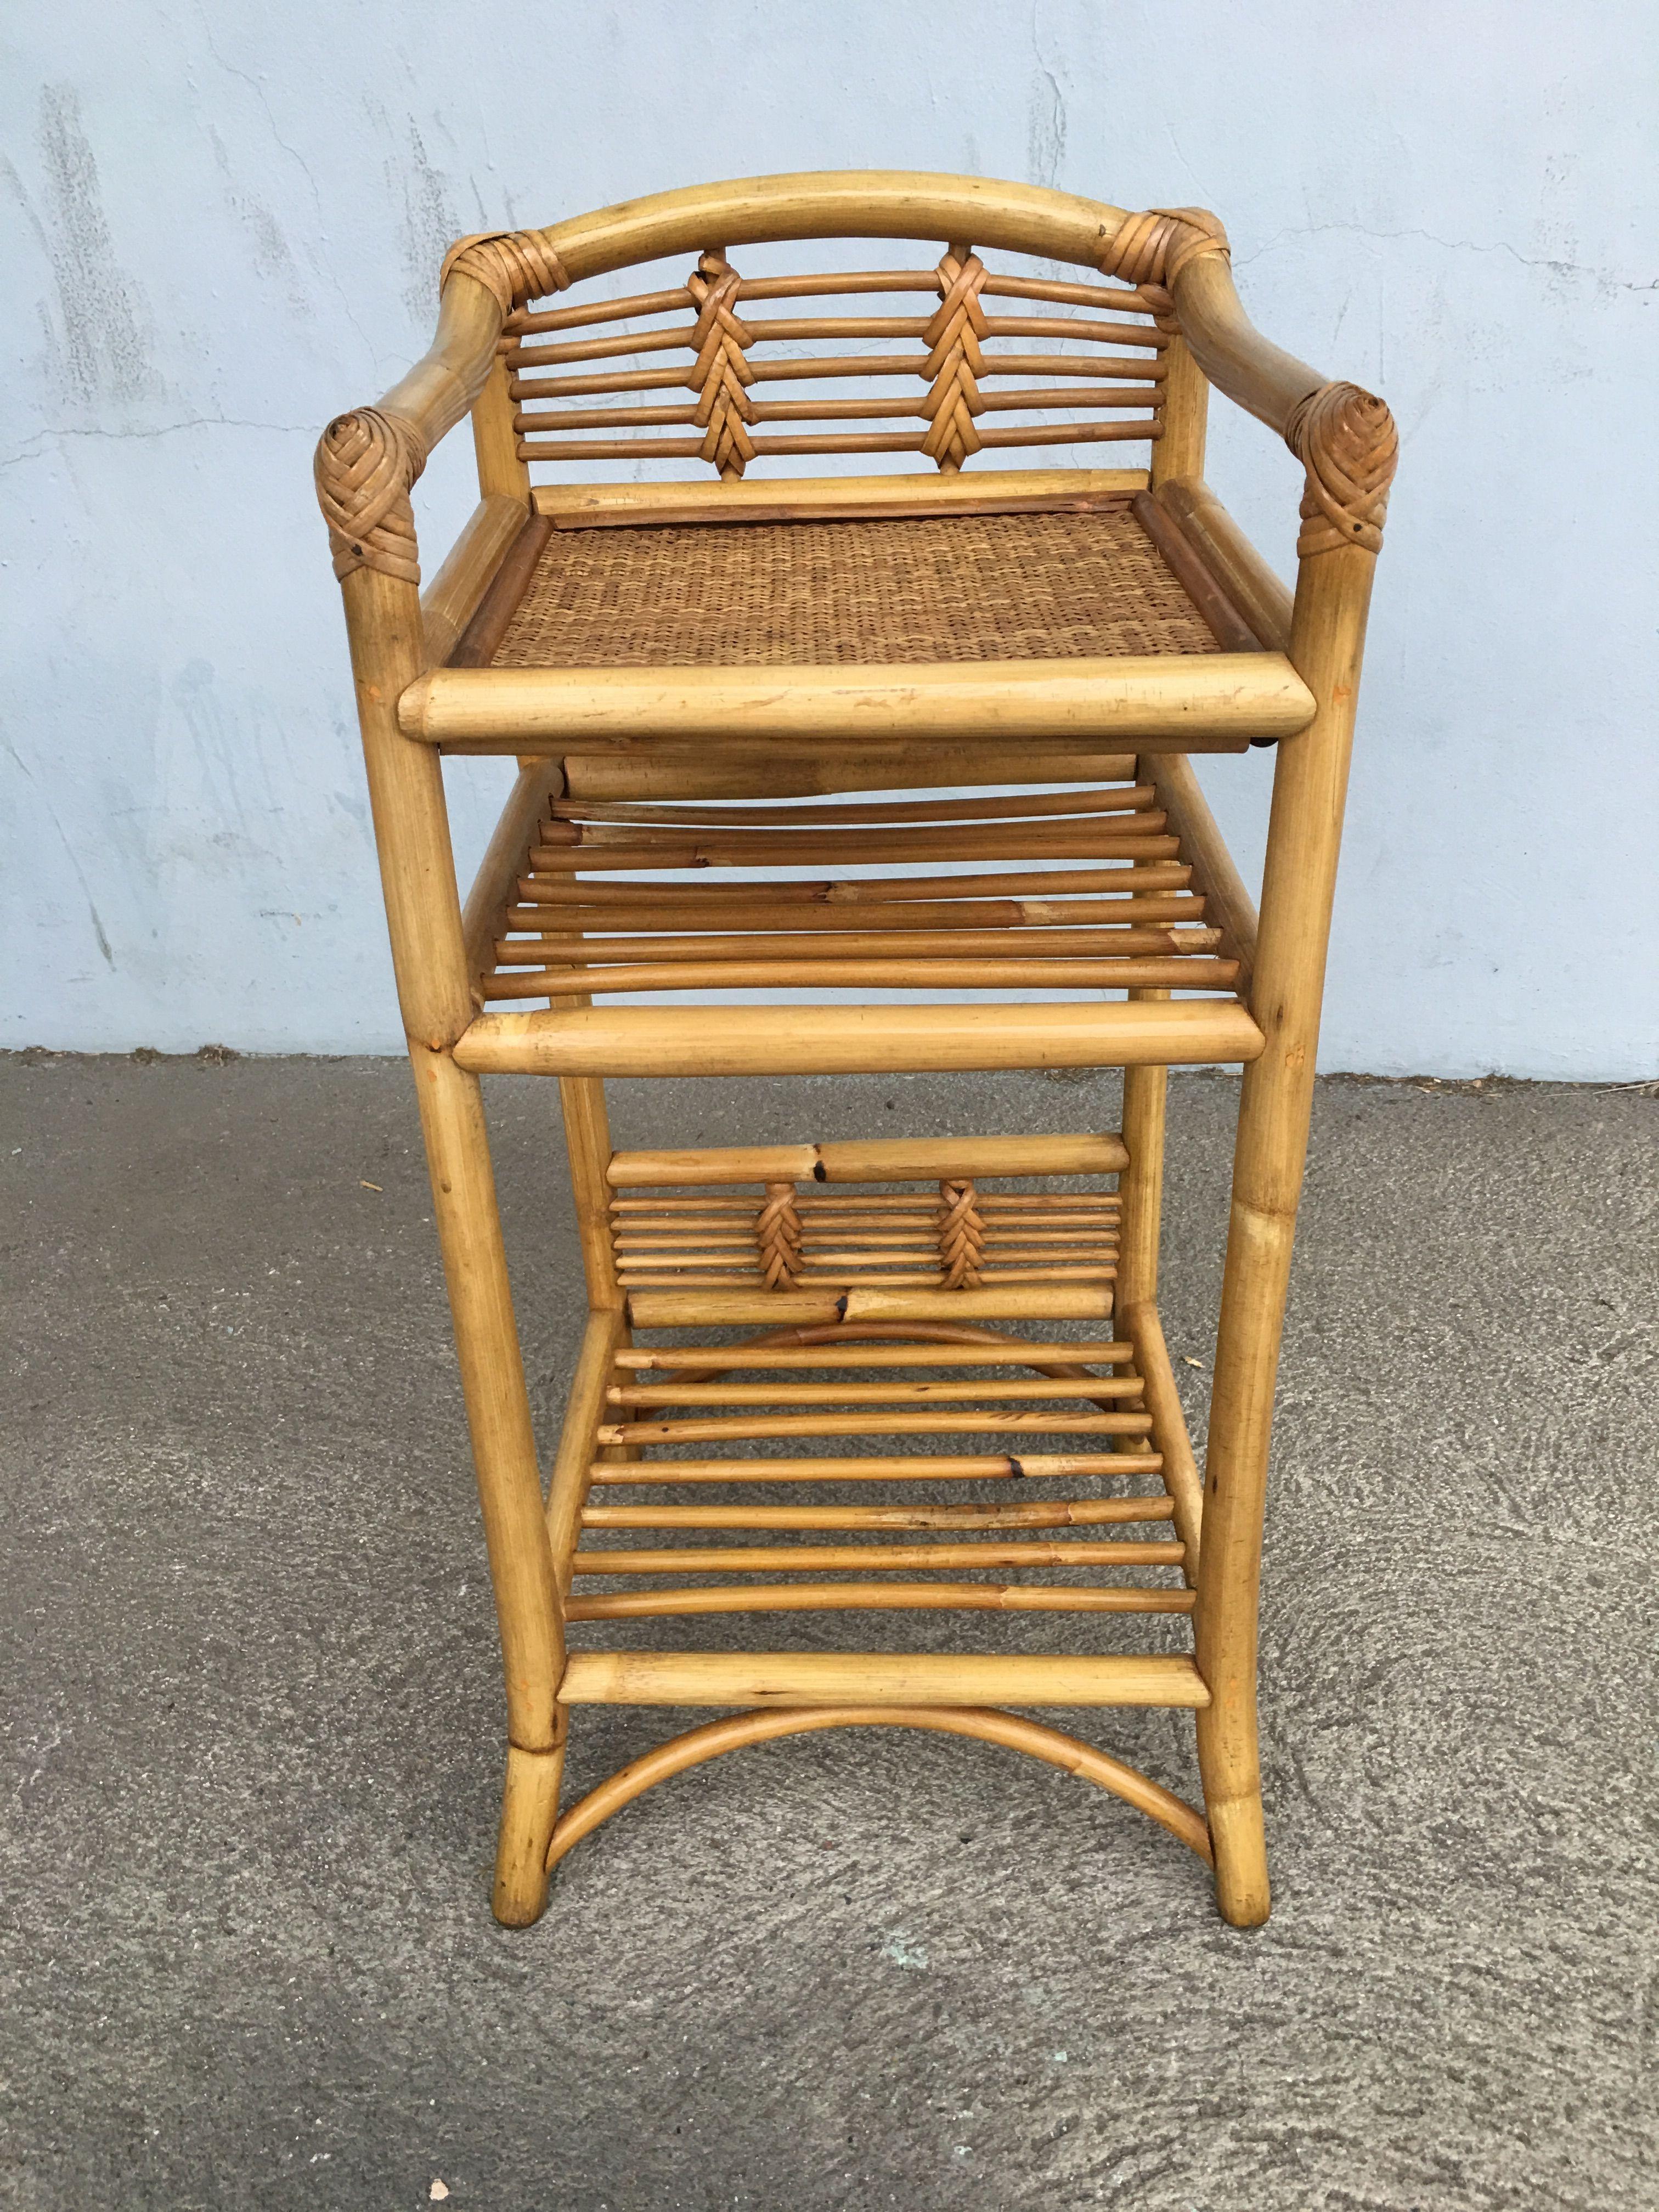 Vintage three-level rattan book self with hand-woven rice mat shelf on top and decorative stick rattan backplate along the top and bottom to display a decorative object such as a vase or statue. Restored to new for you. All rattan, bamboo and wicker